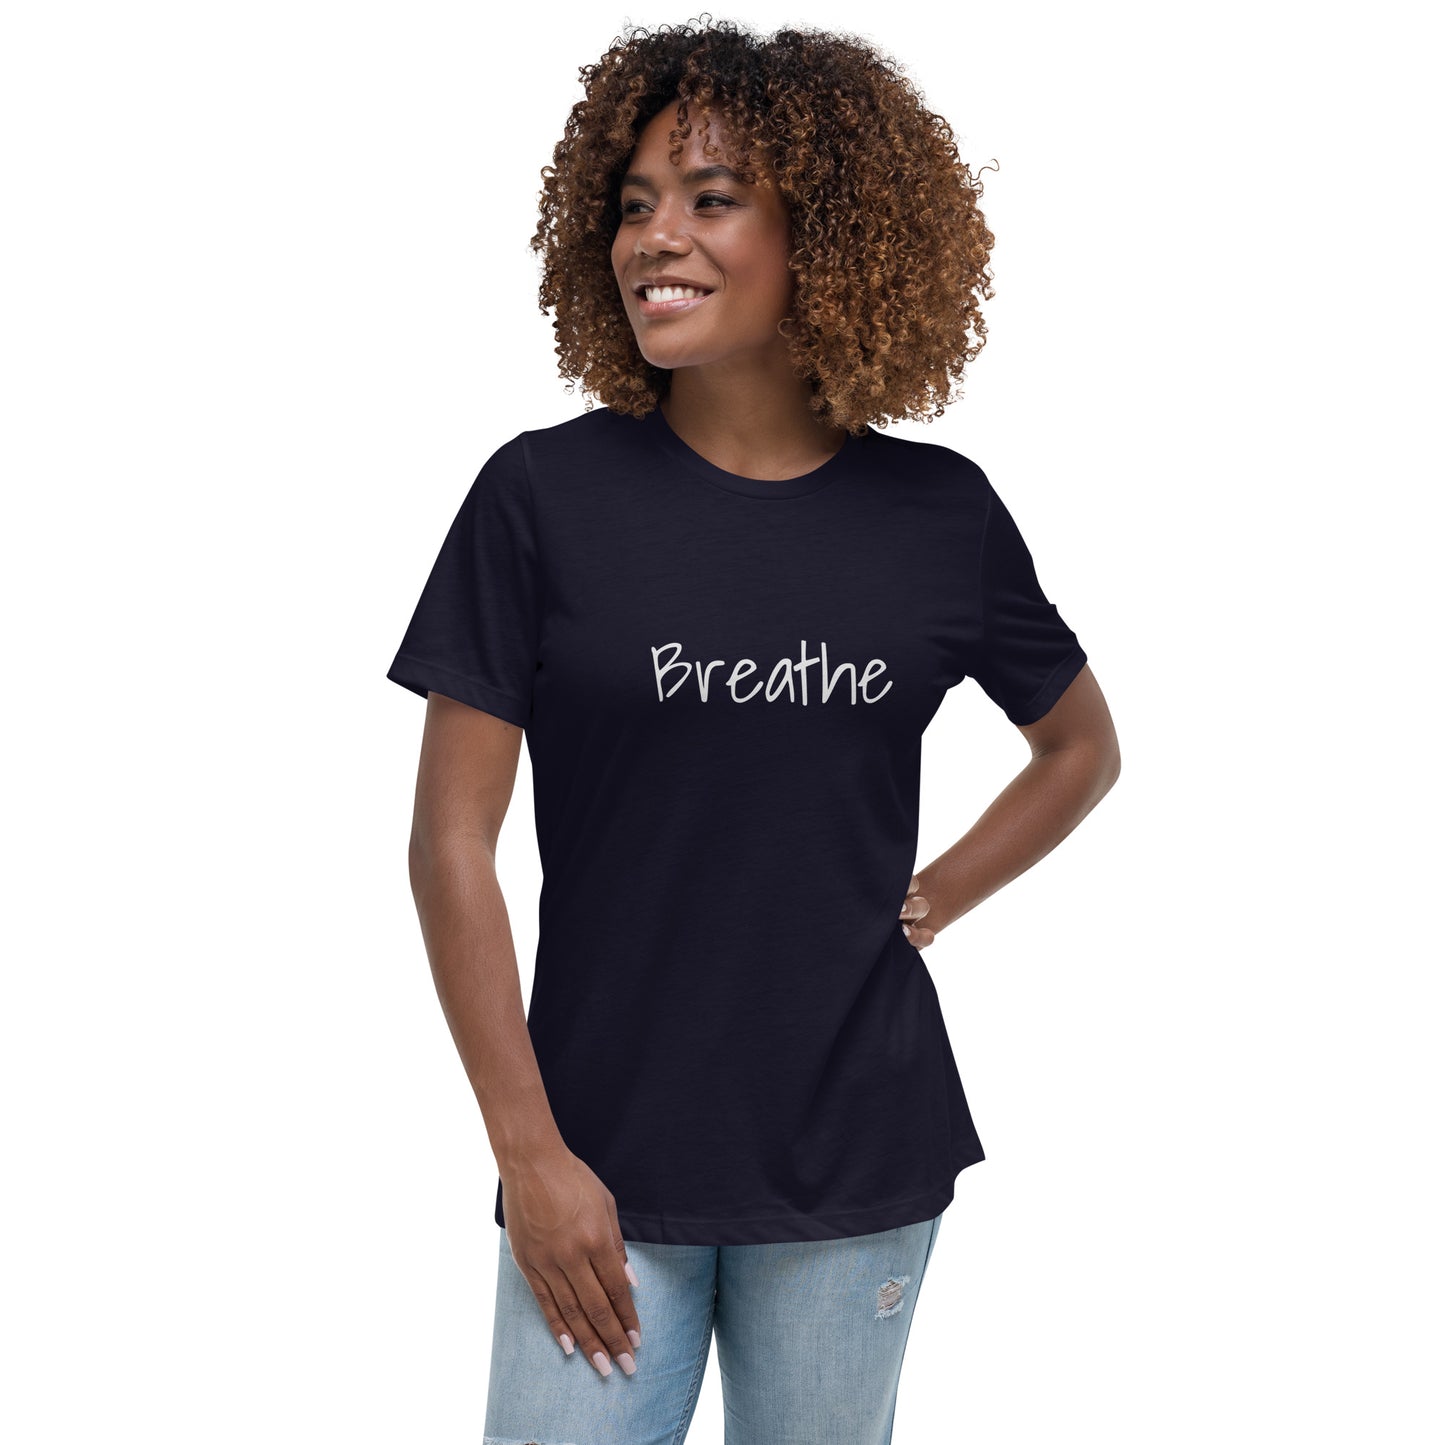 Women's Relaxed Crew Neck Top and T-Shirt